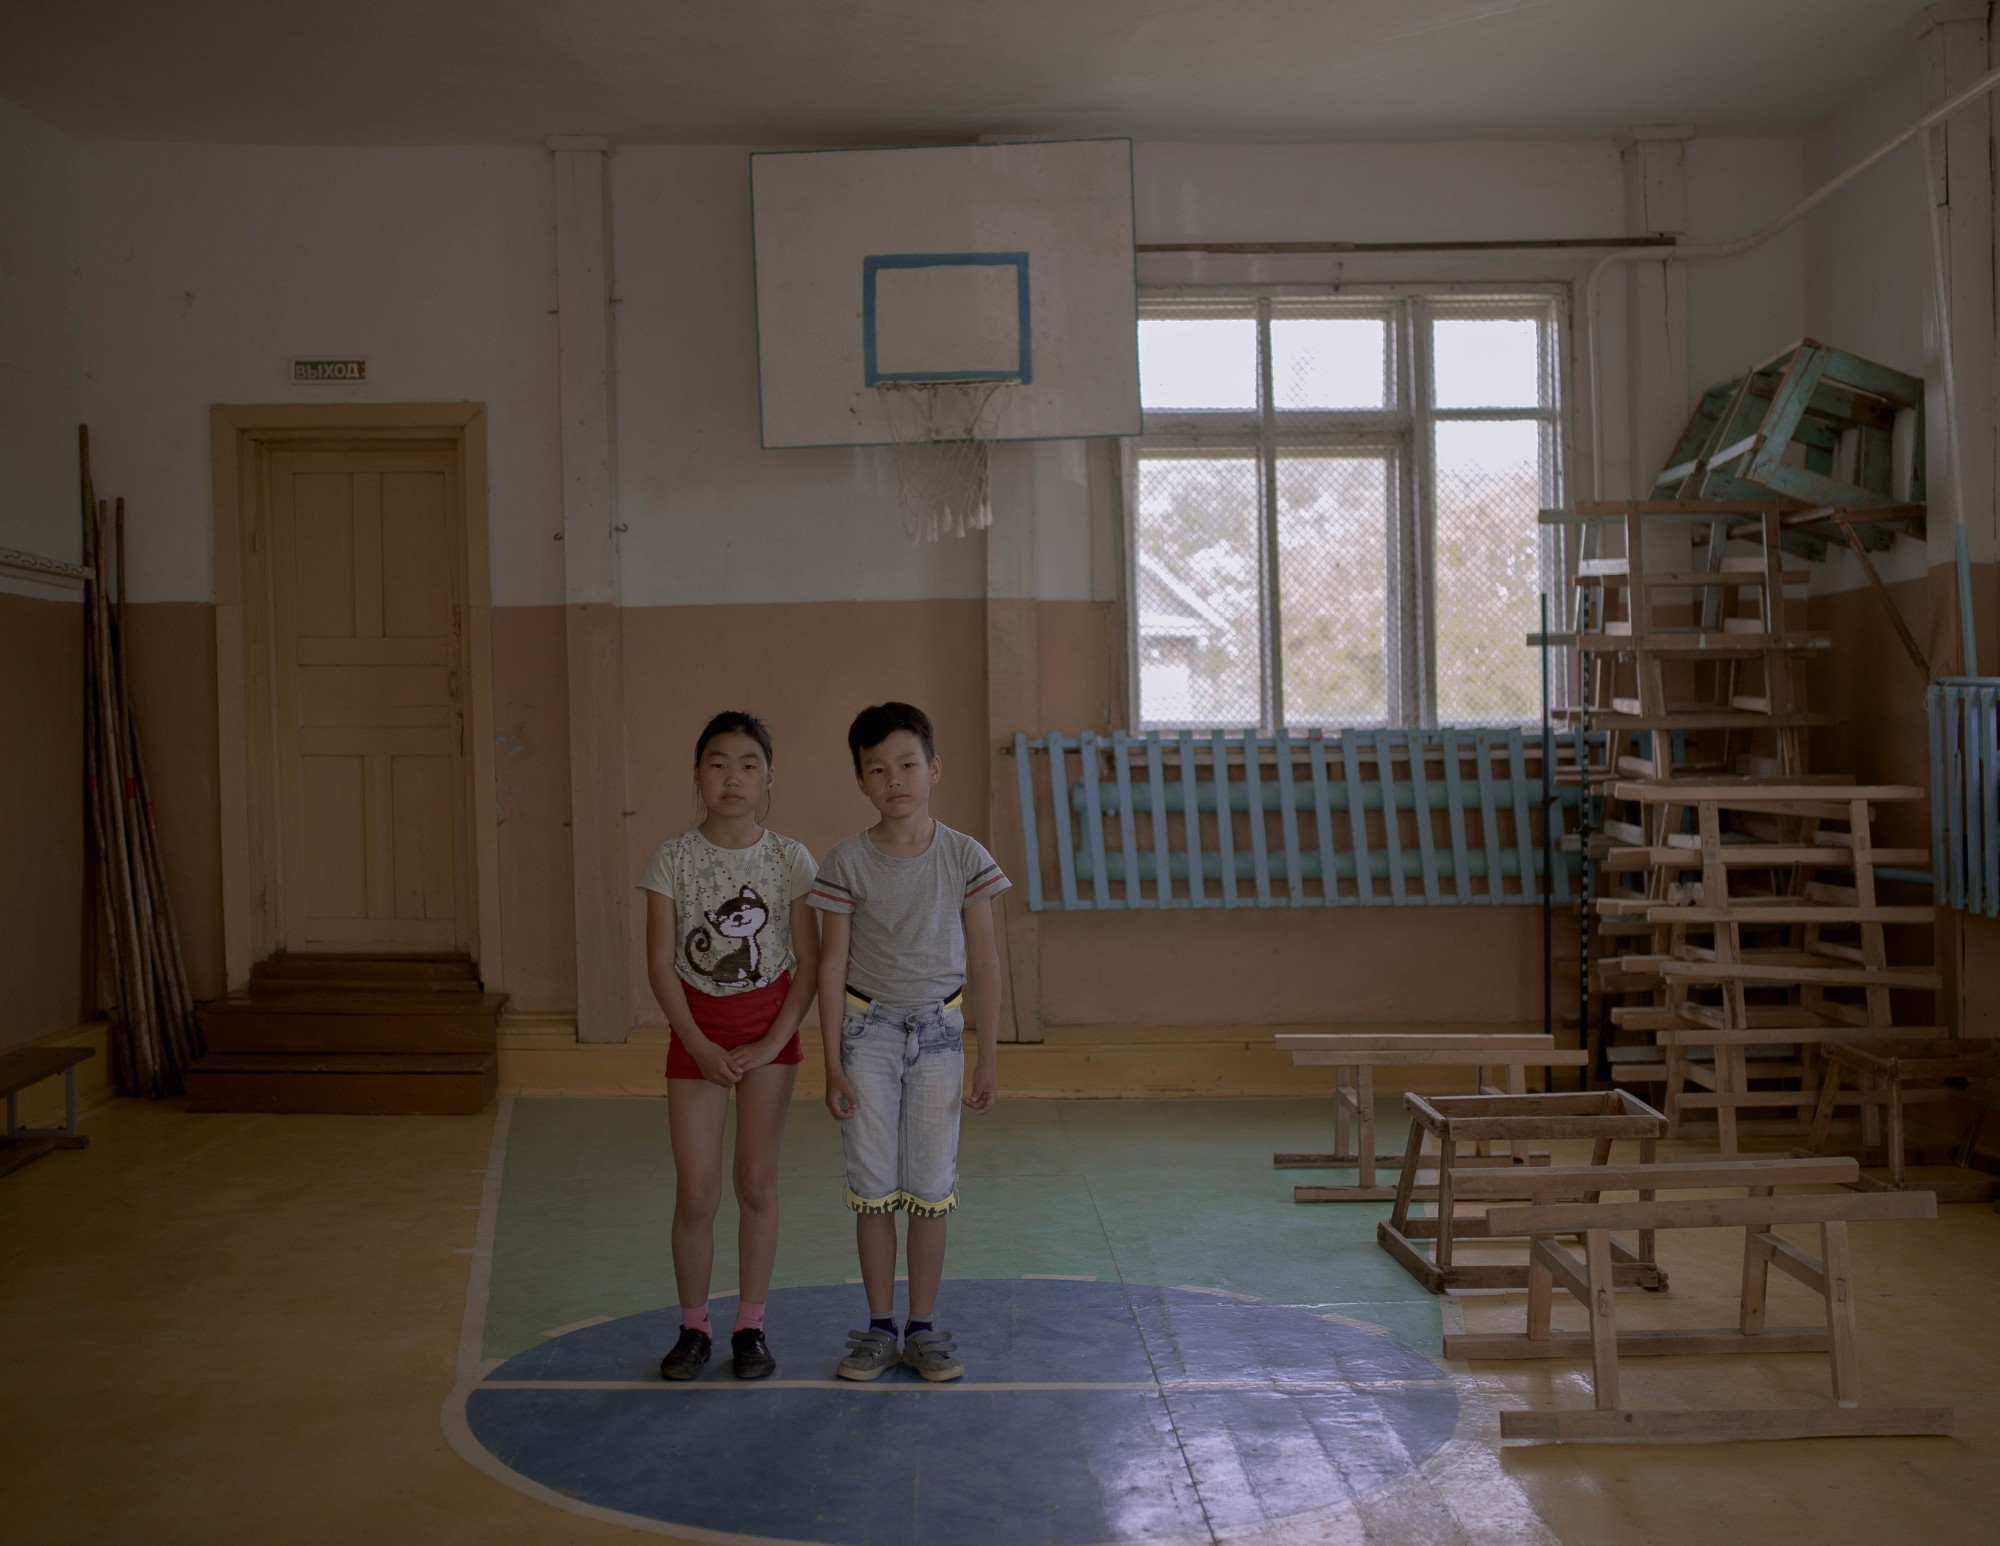 In Dada, I talked to Danil Ivanovich Beldy, a PE teacher with nearly 40 years experience, and a coach in national sports and gymnastic competitions. Almost all the equipment in this gym was made by Danil himself